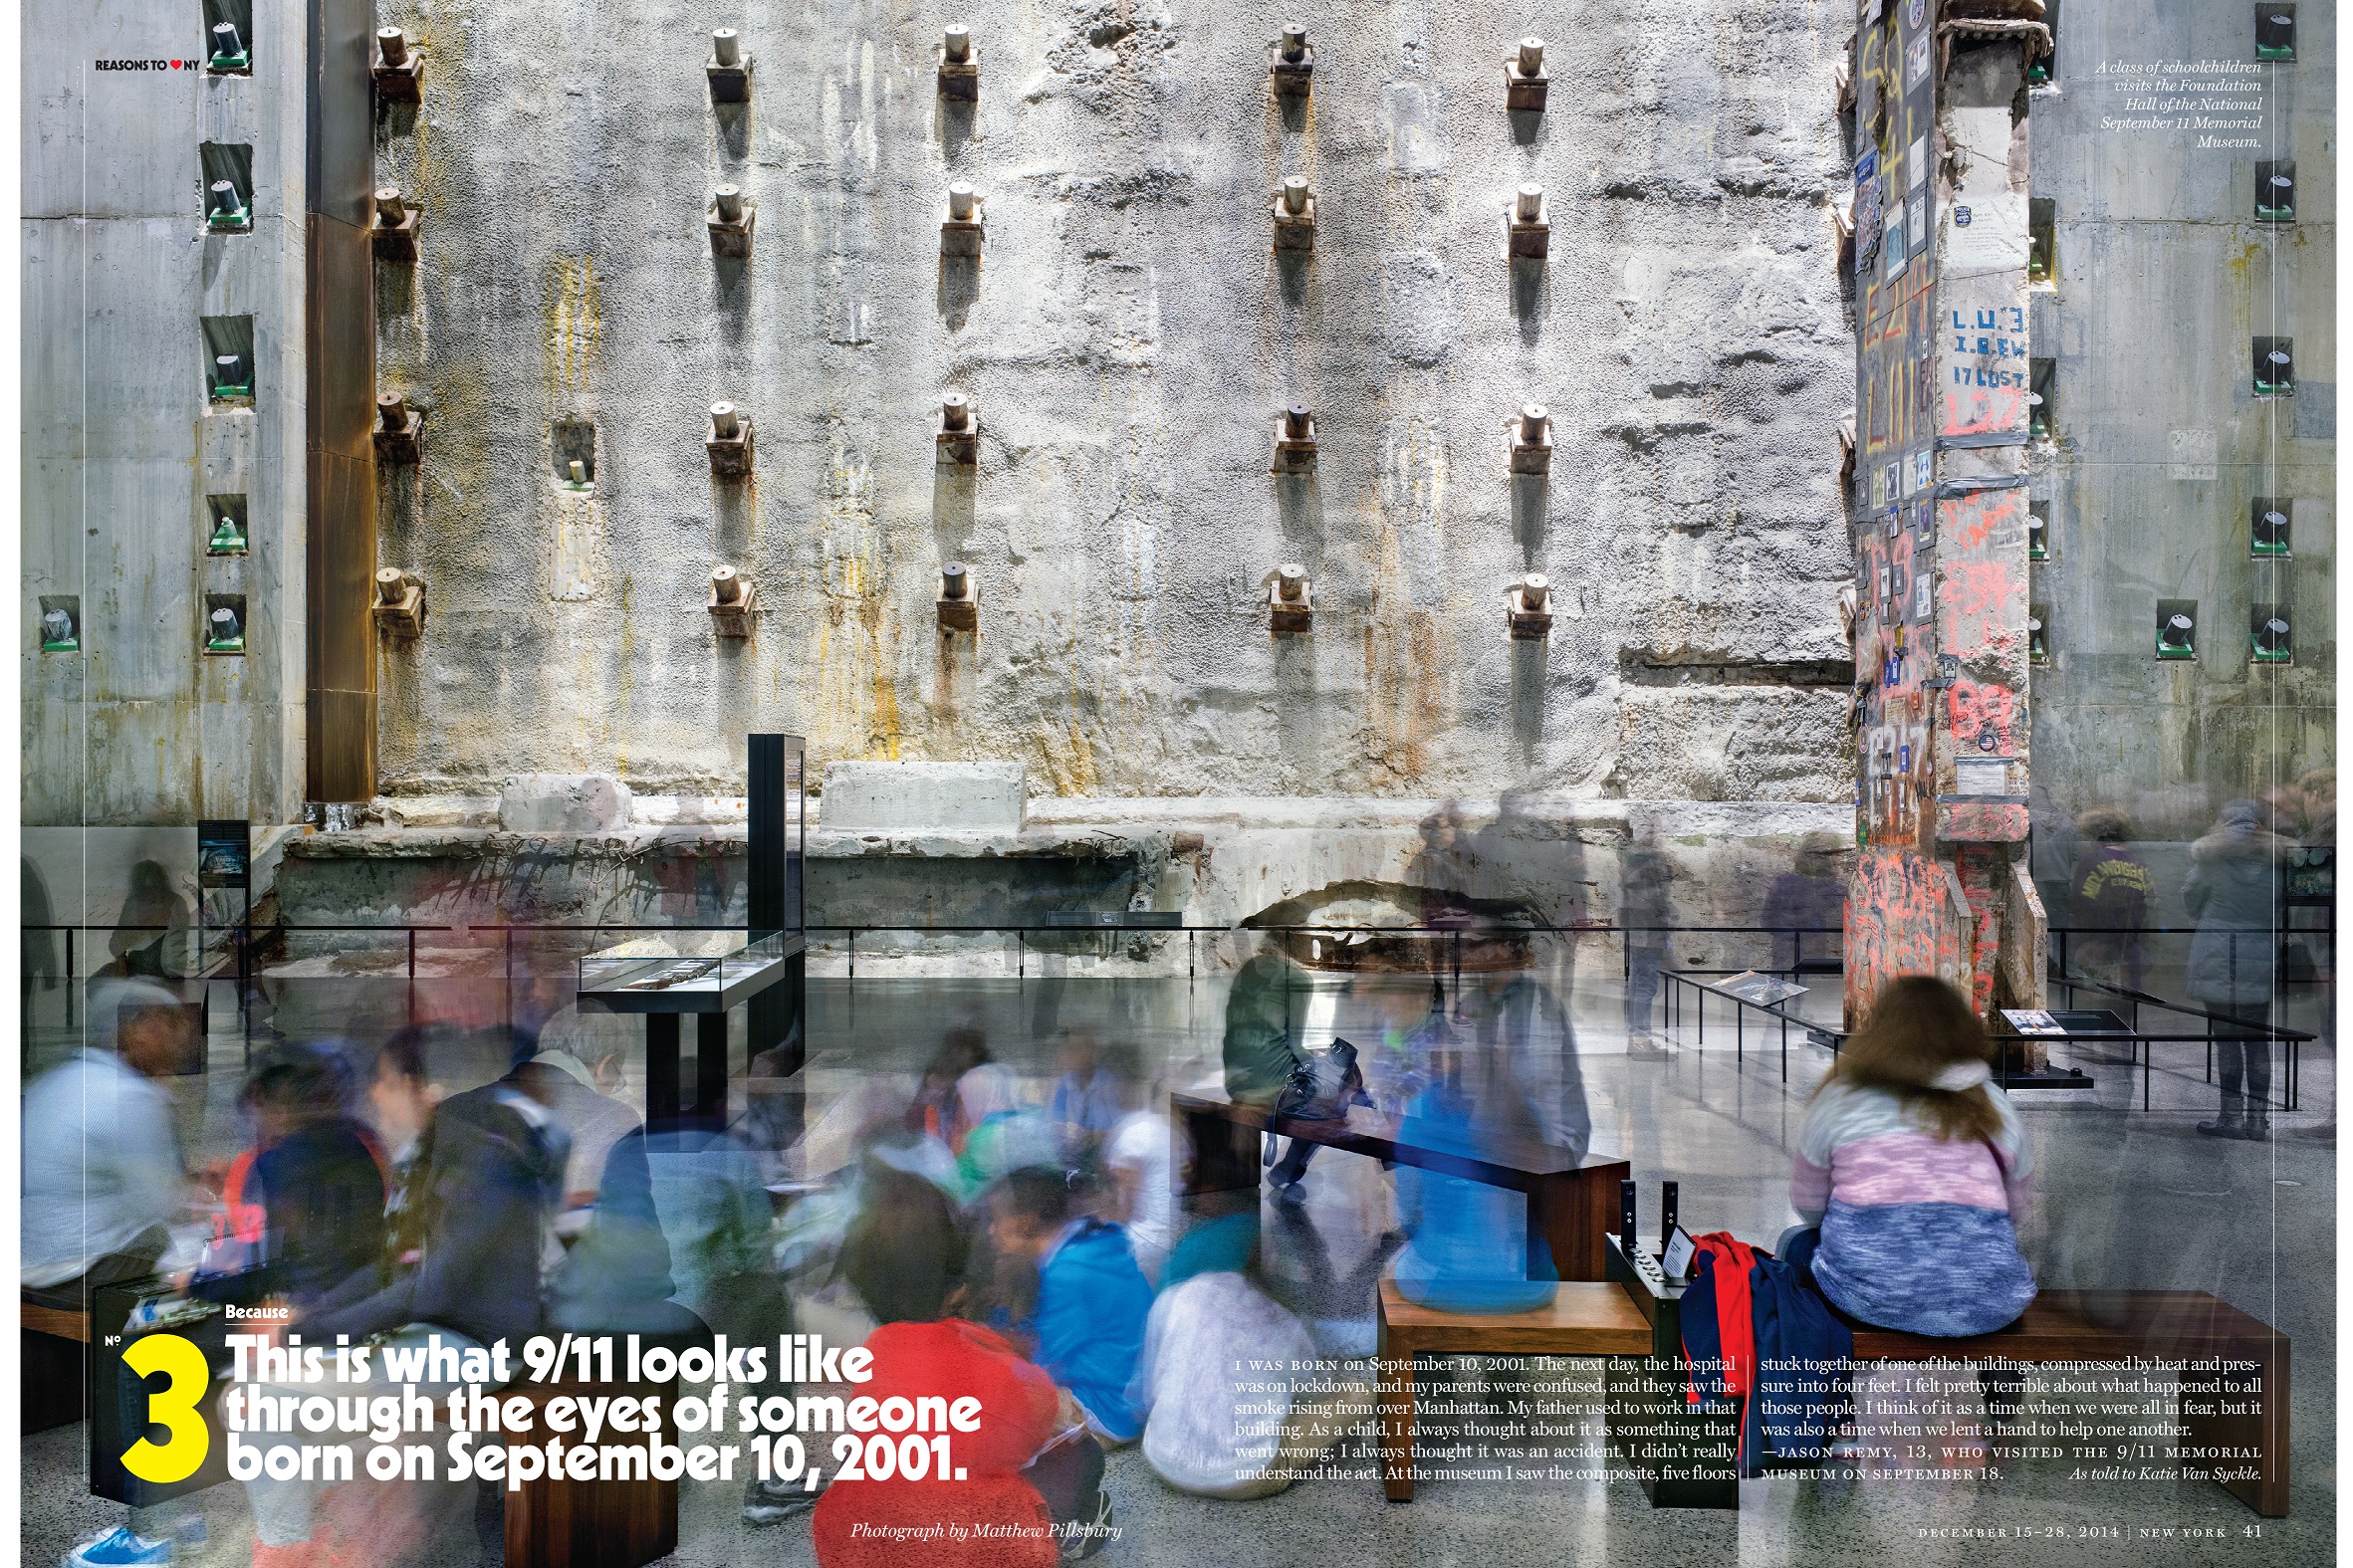 A page from New York Magazine features an image of visitors in Foundation Hall at the Museum. A headline reads, “This is what 9/11 looks like through the eyes of someone born on September 10, 2001.”